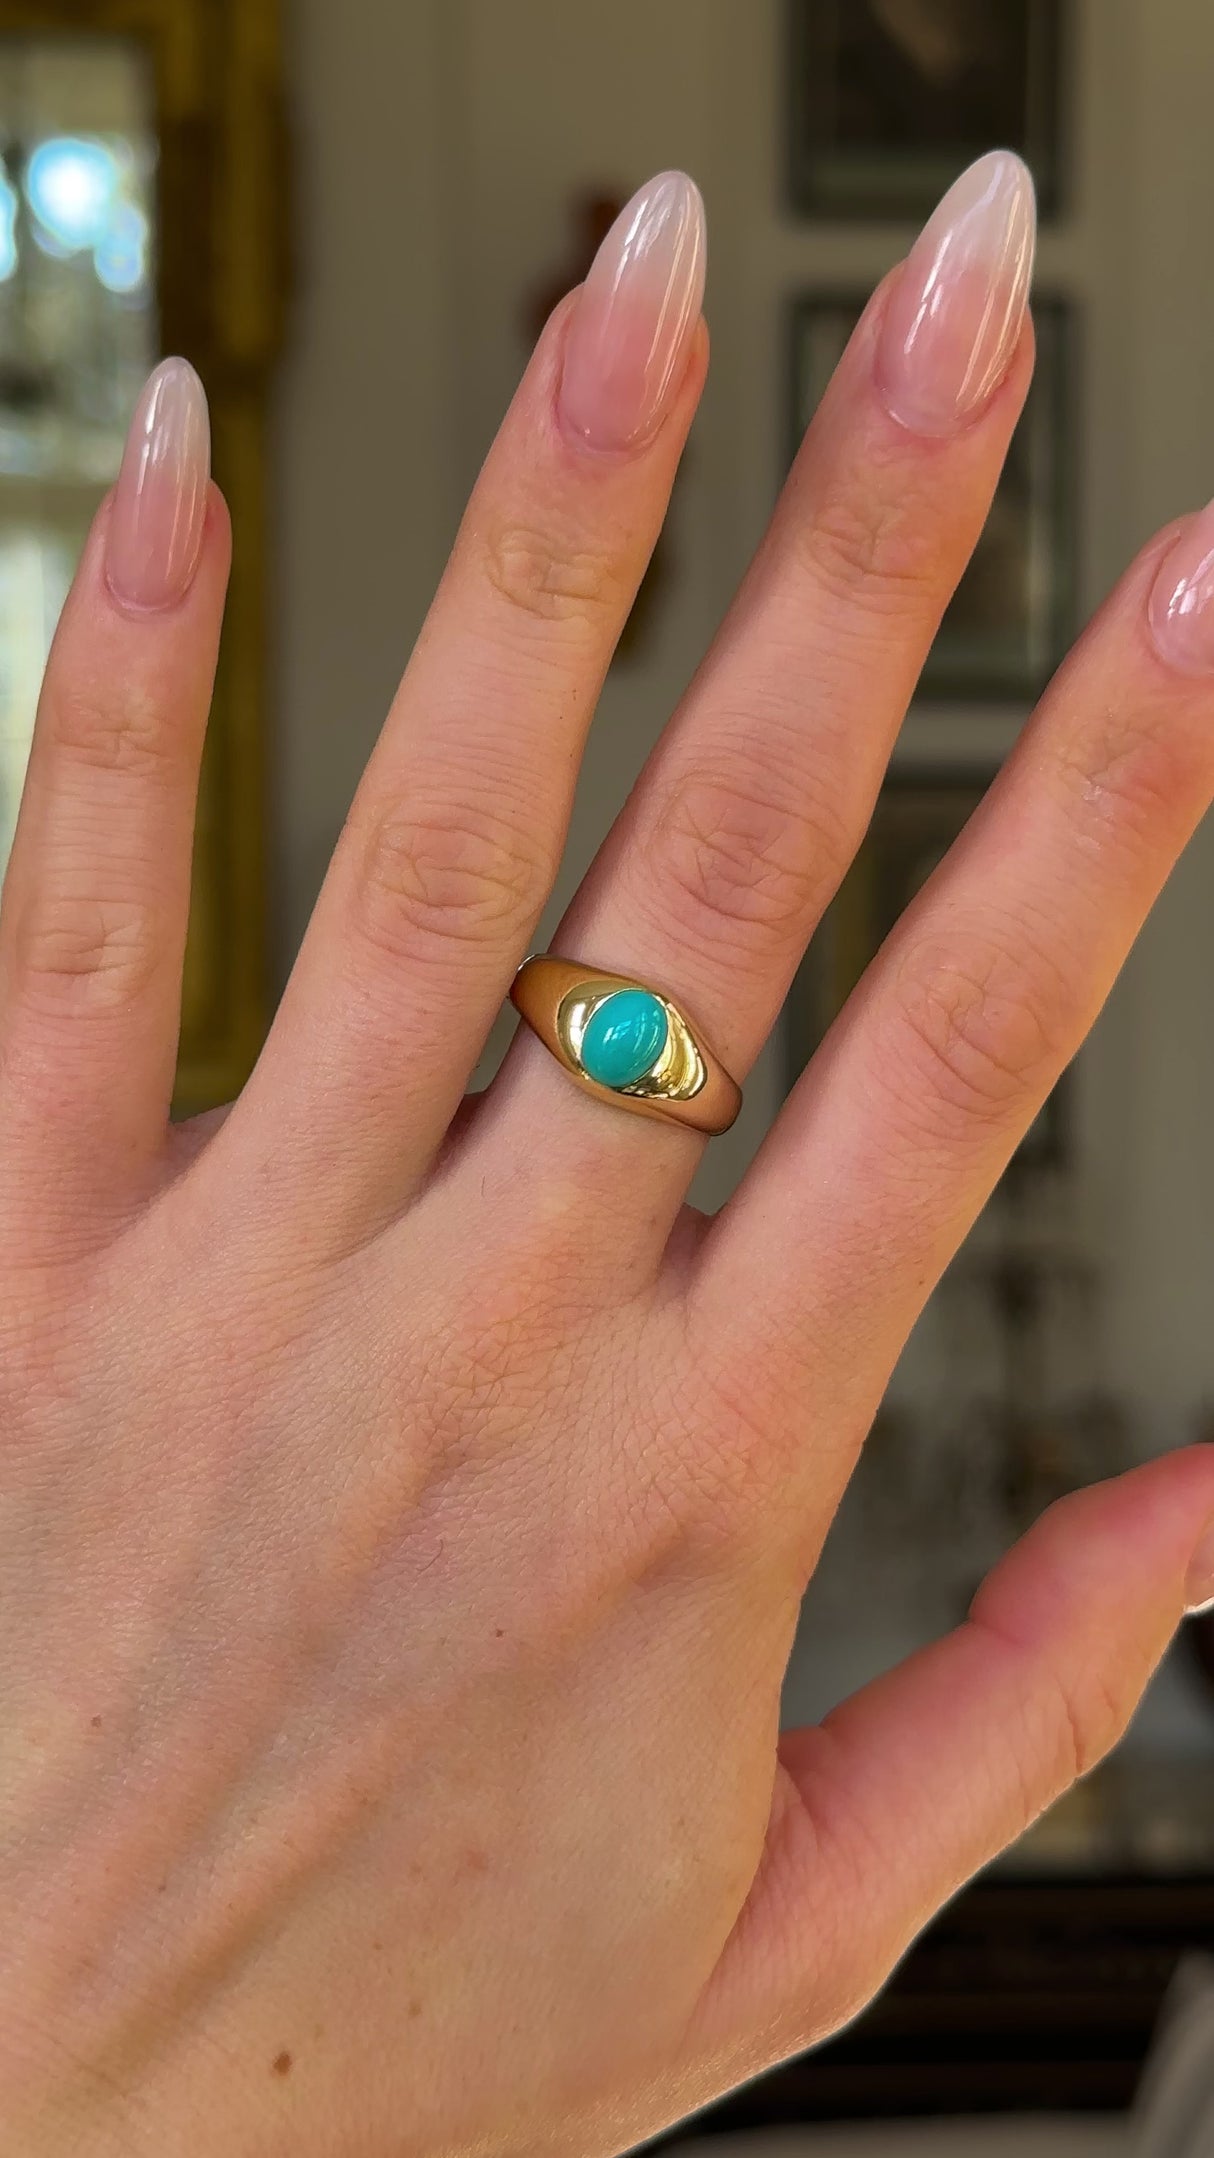 Antique, Single-Stone Turquoise Gypsy Ring, 18ct Yellow Gold worn on hand and rotated to give perspective.